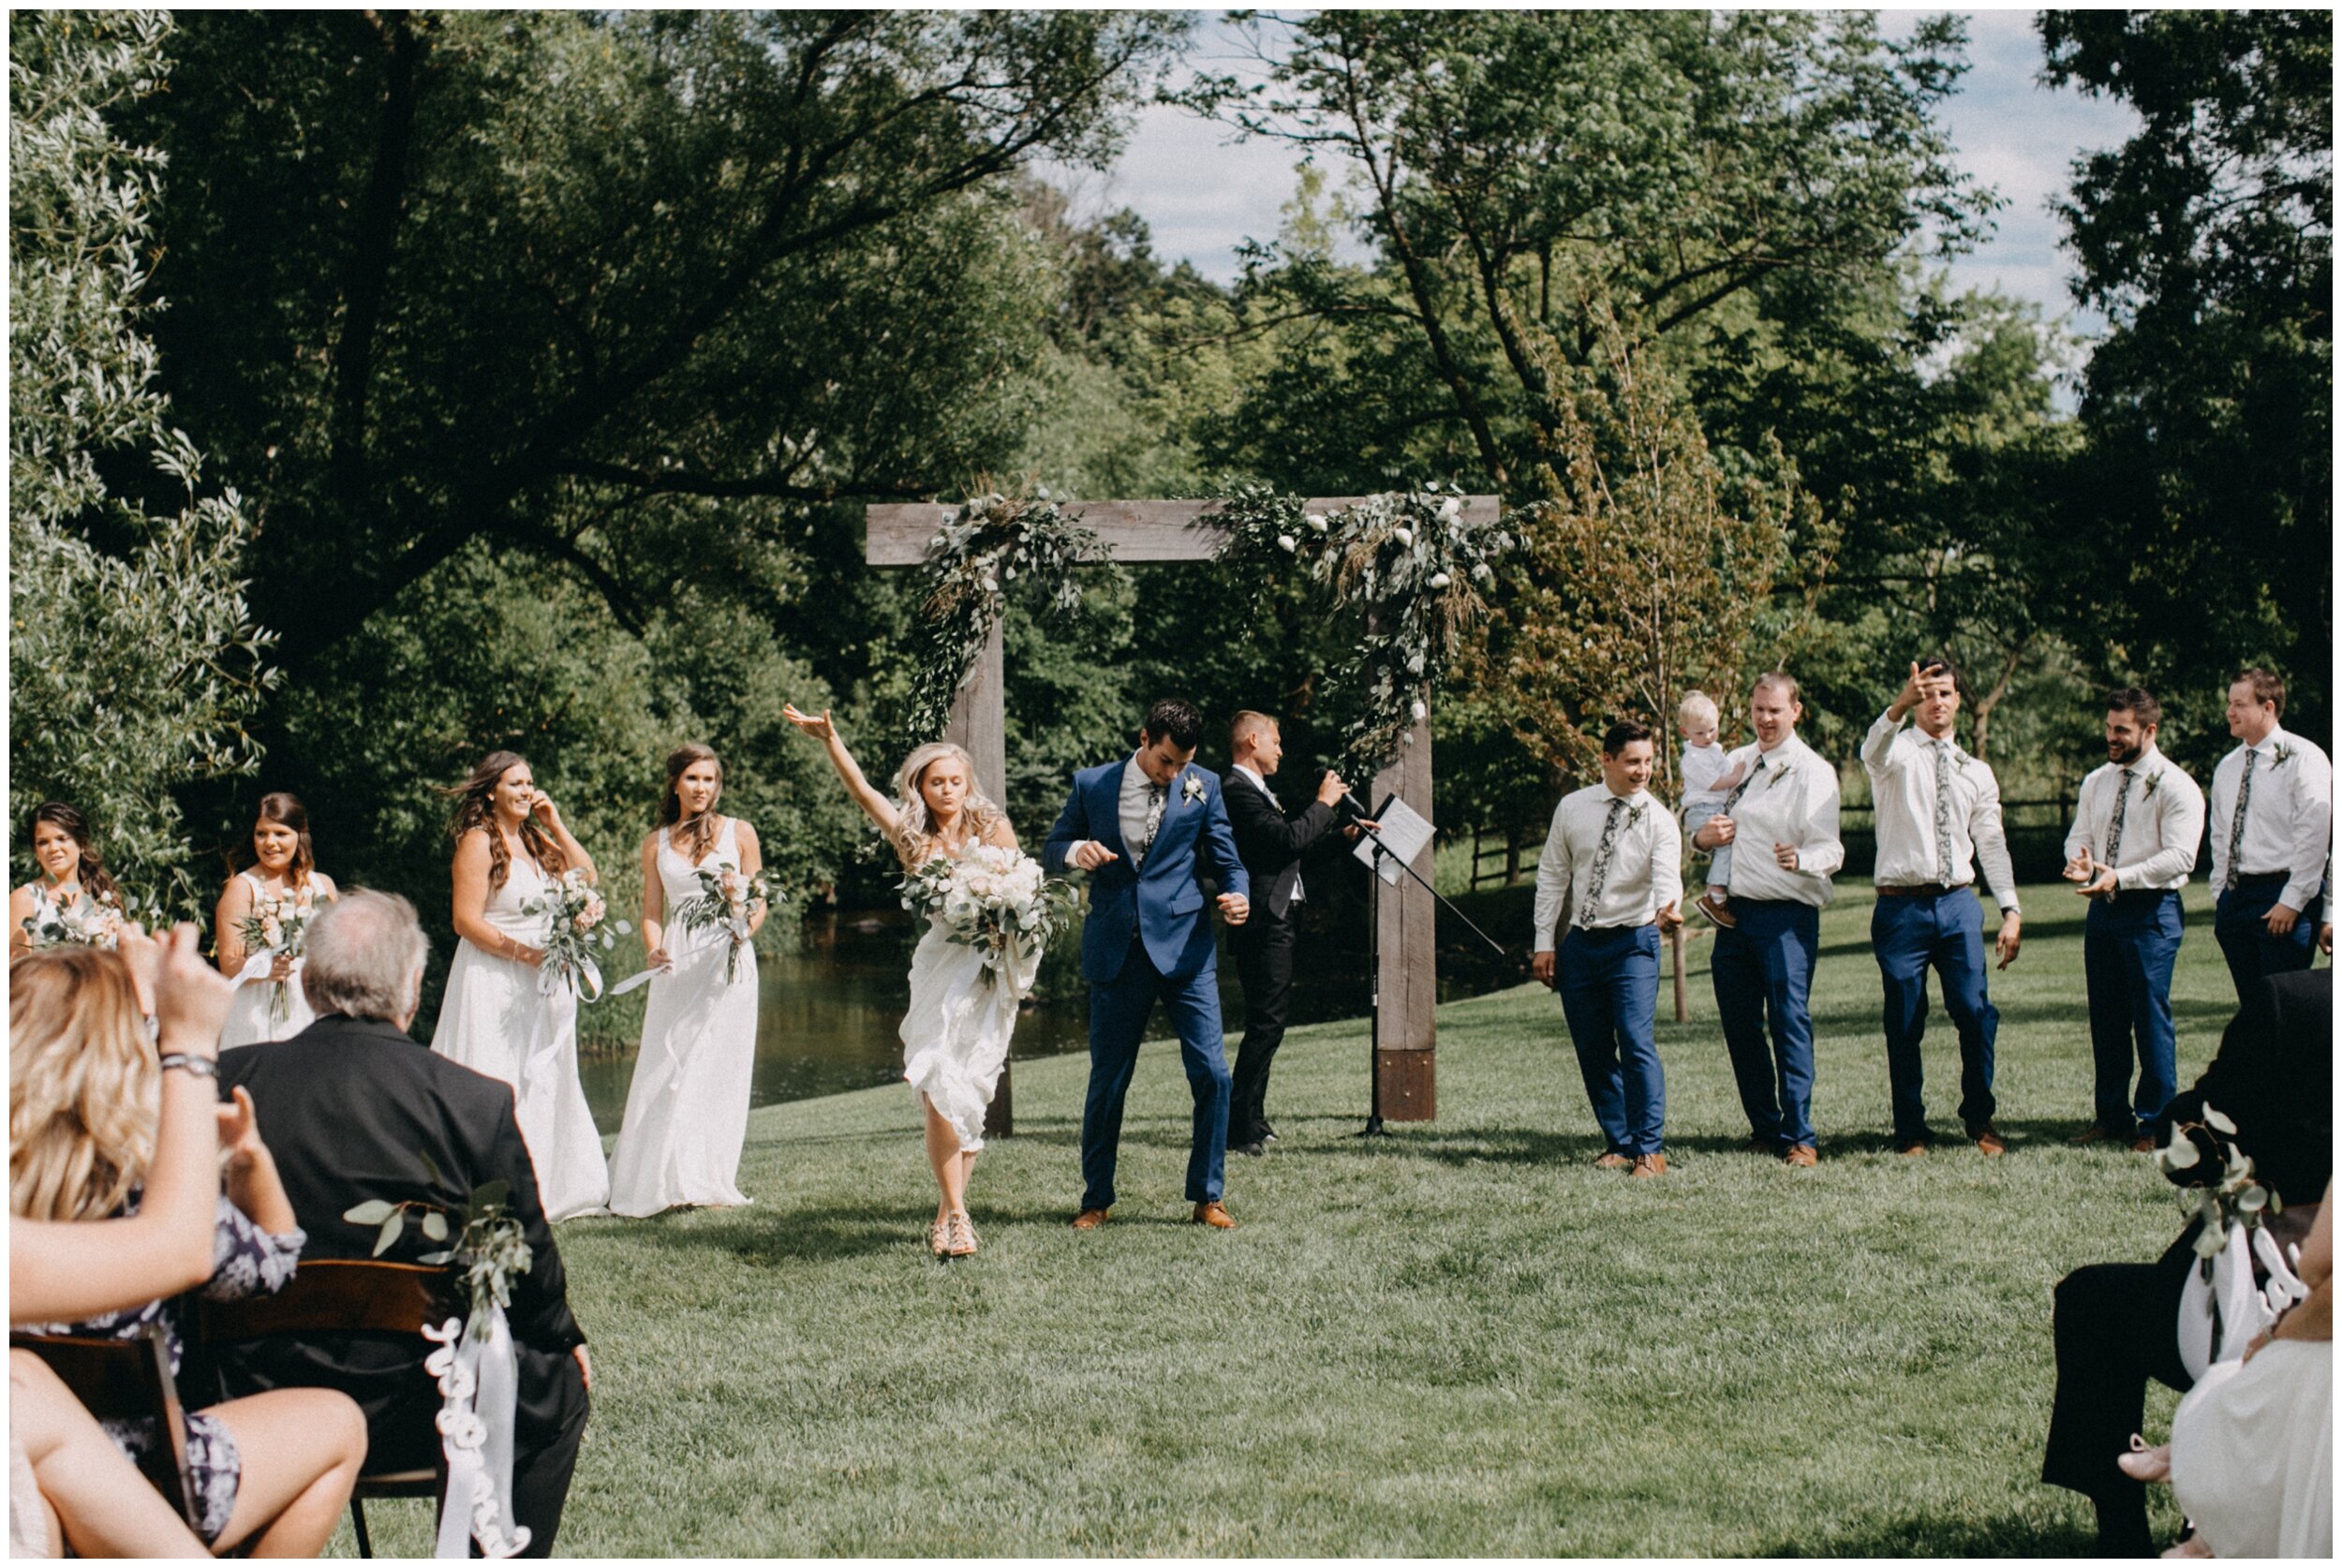 Bride and groom dancing down aisle after outdoor Minnesota barn wedding ceremony